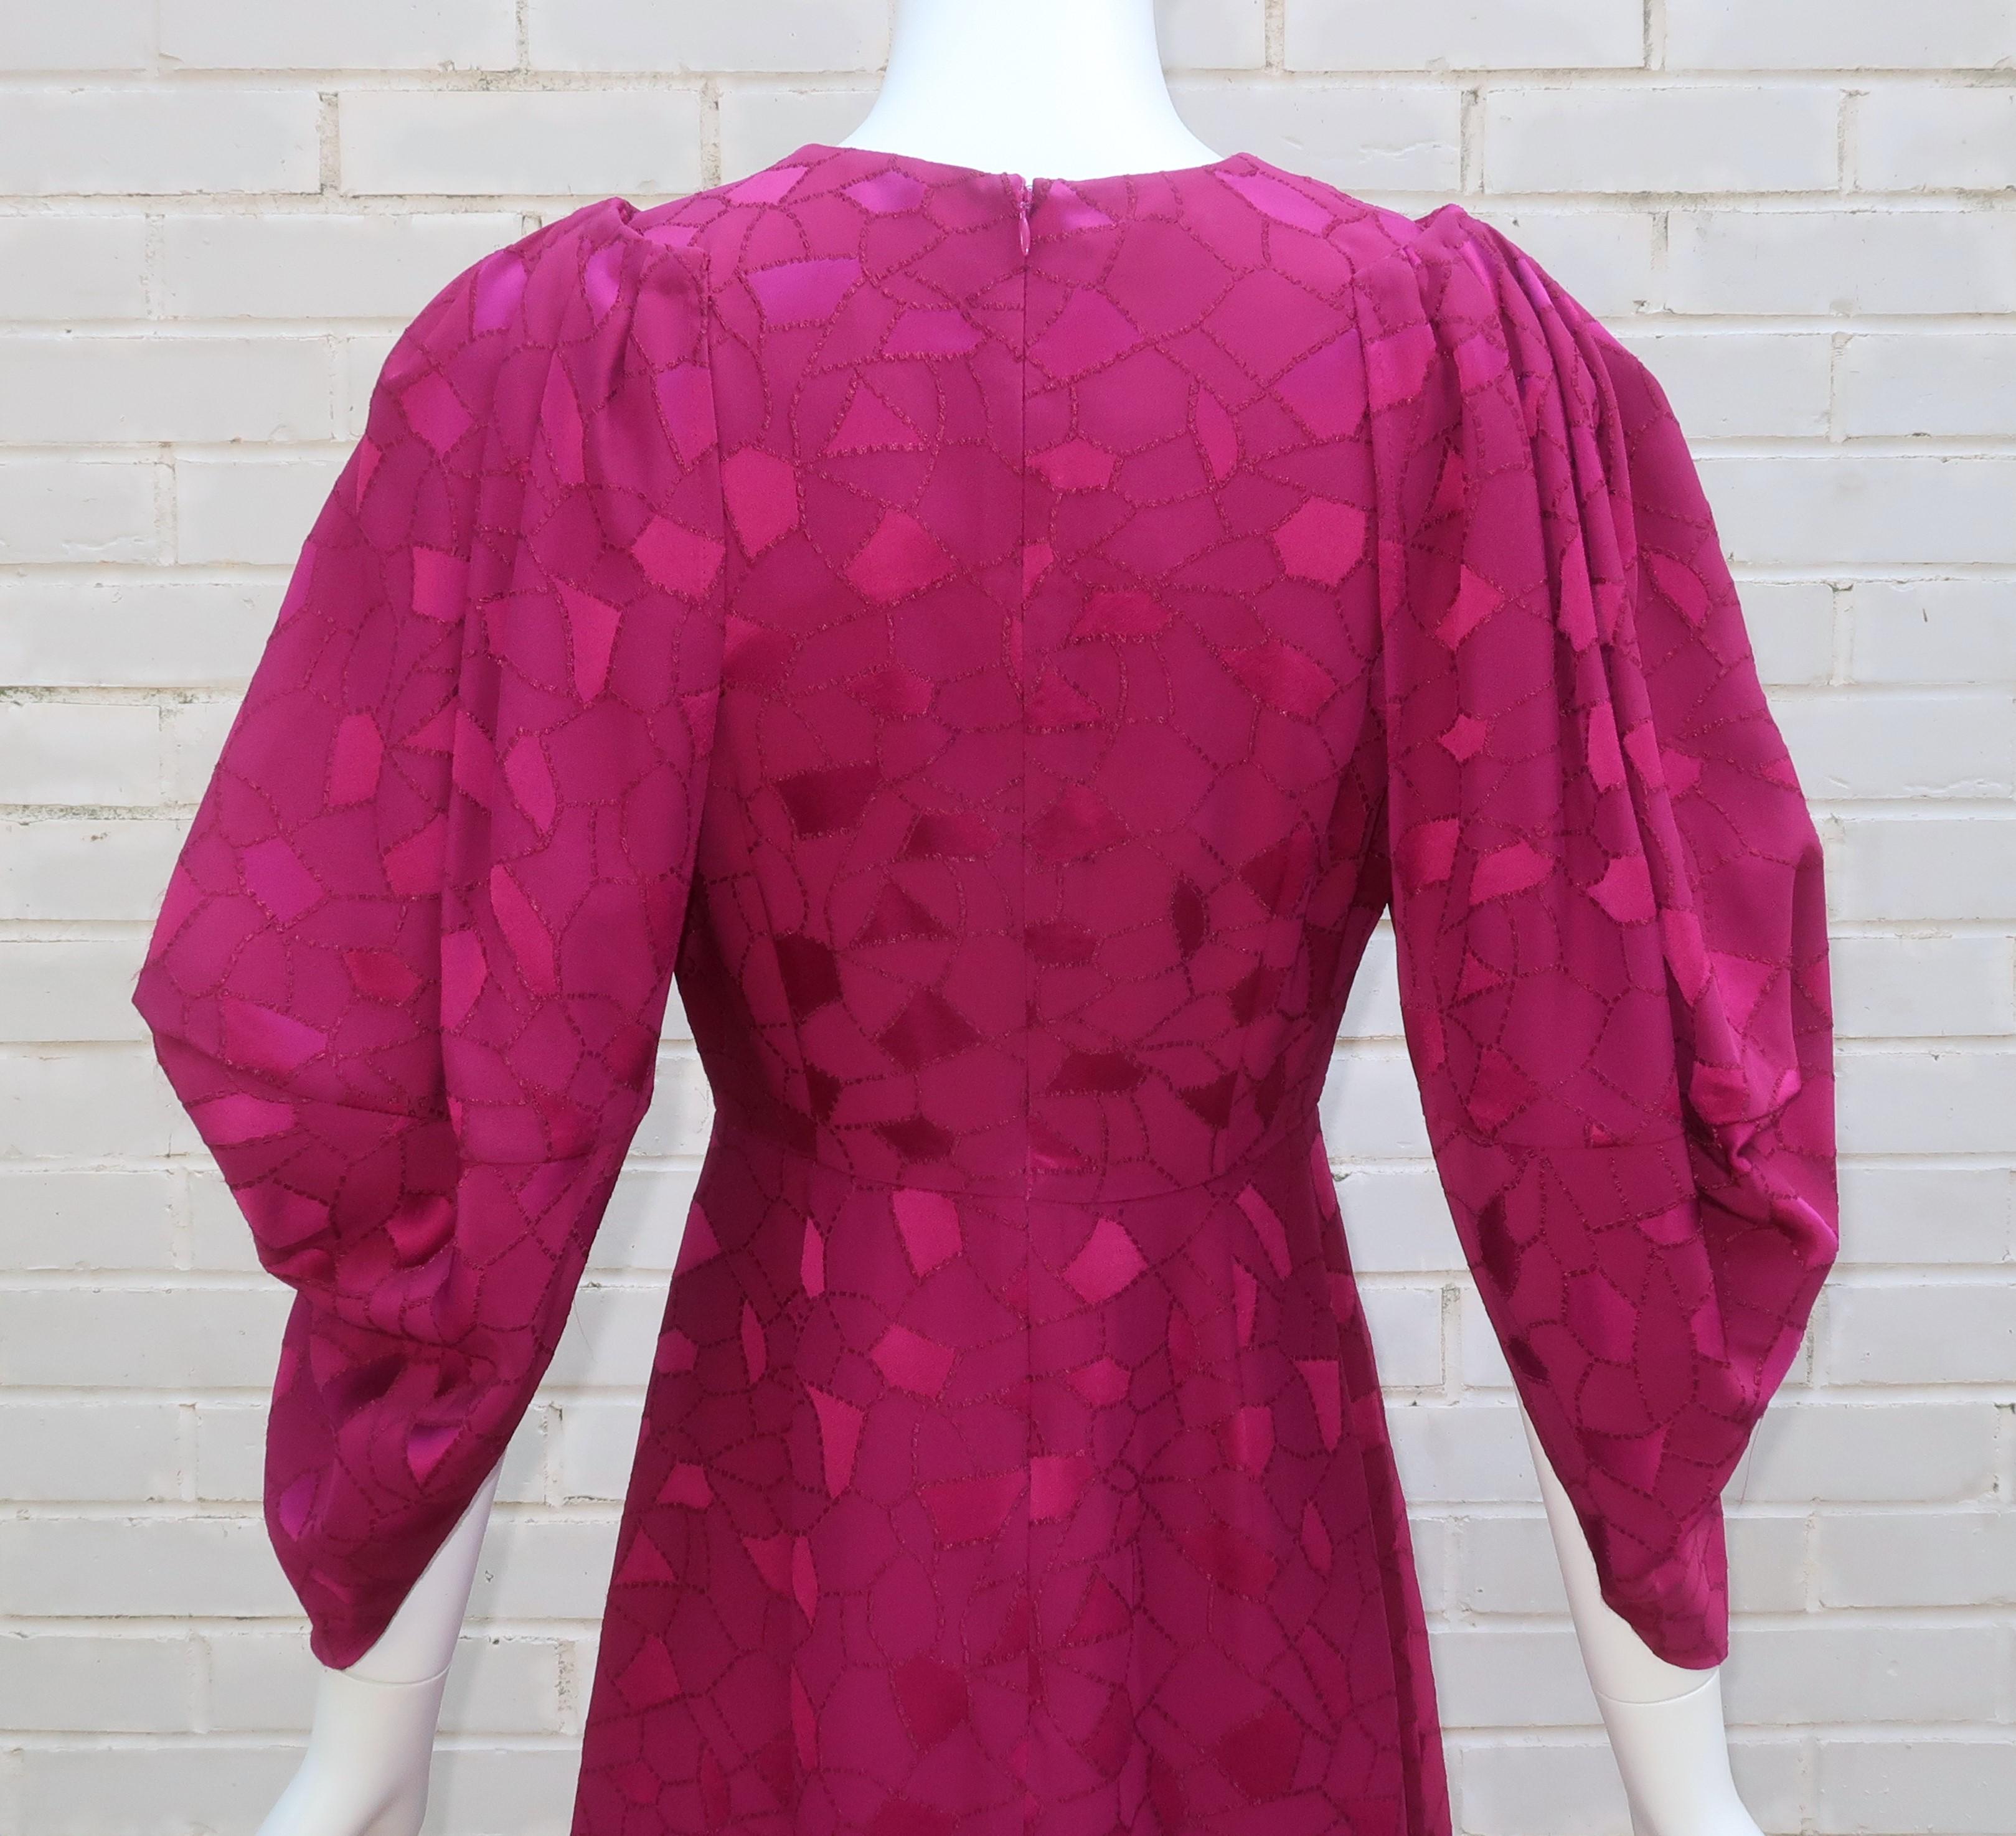 CO Cocoon Sleeve Magenta Dress, 2018 For Sale 4